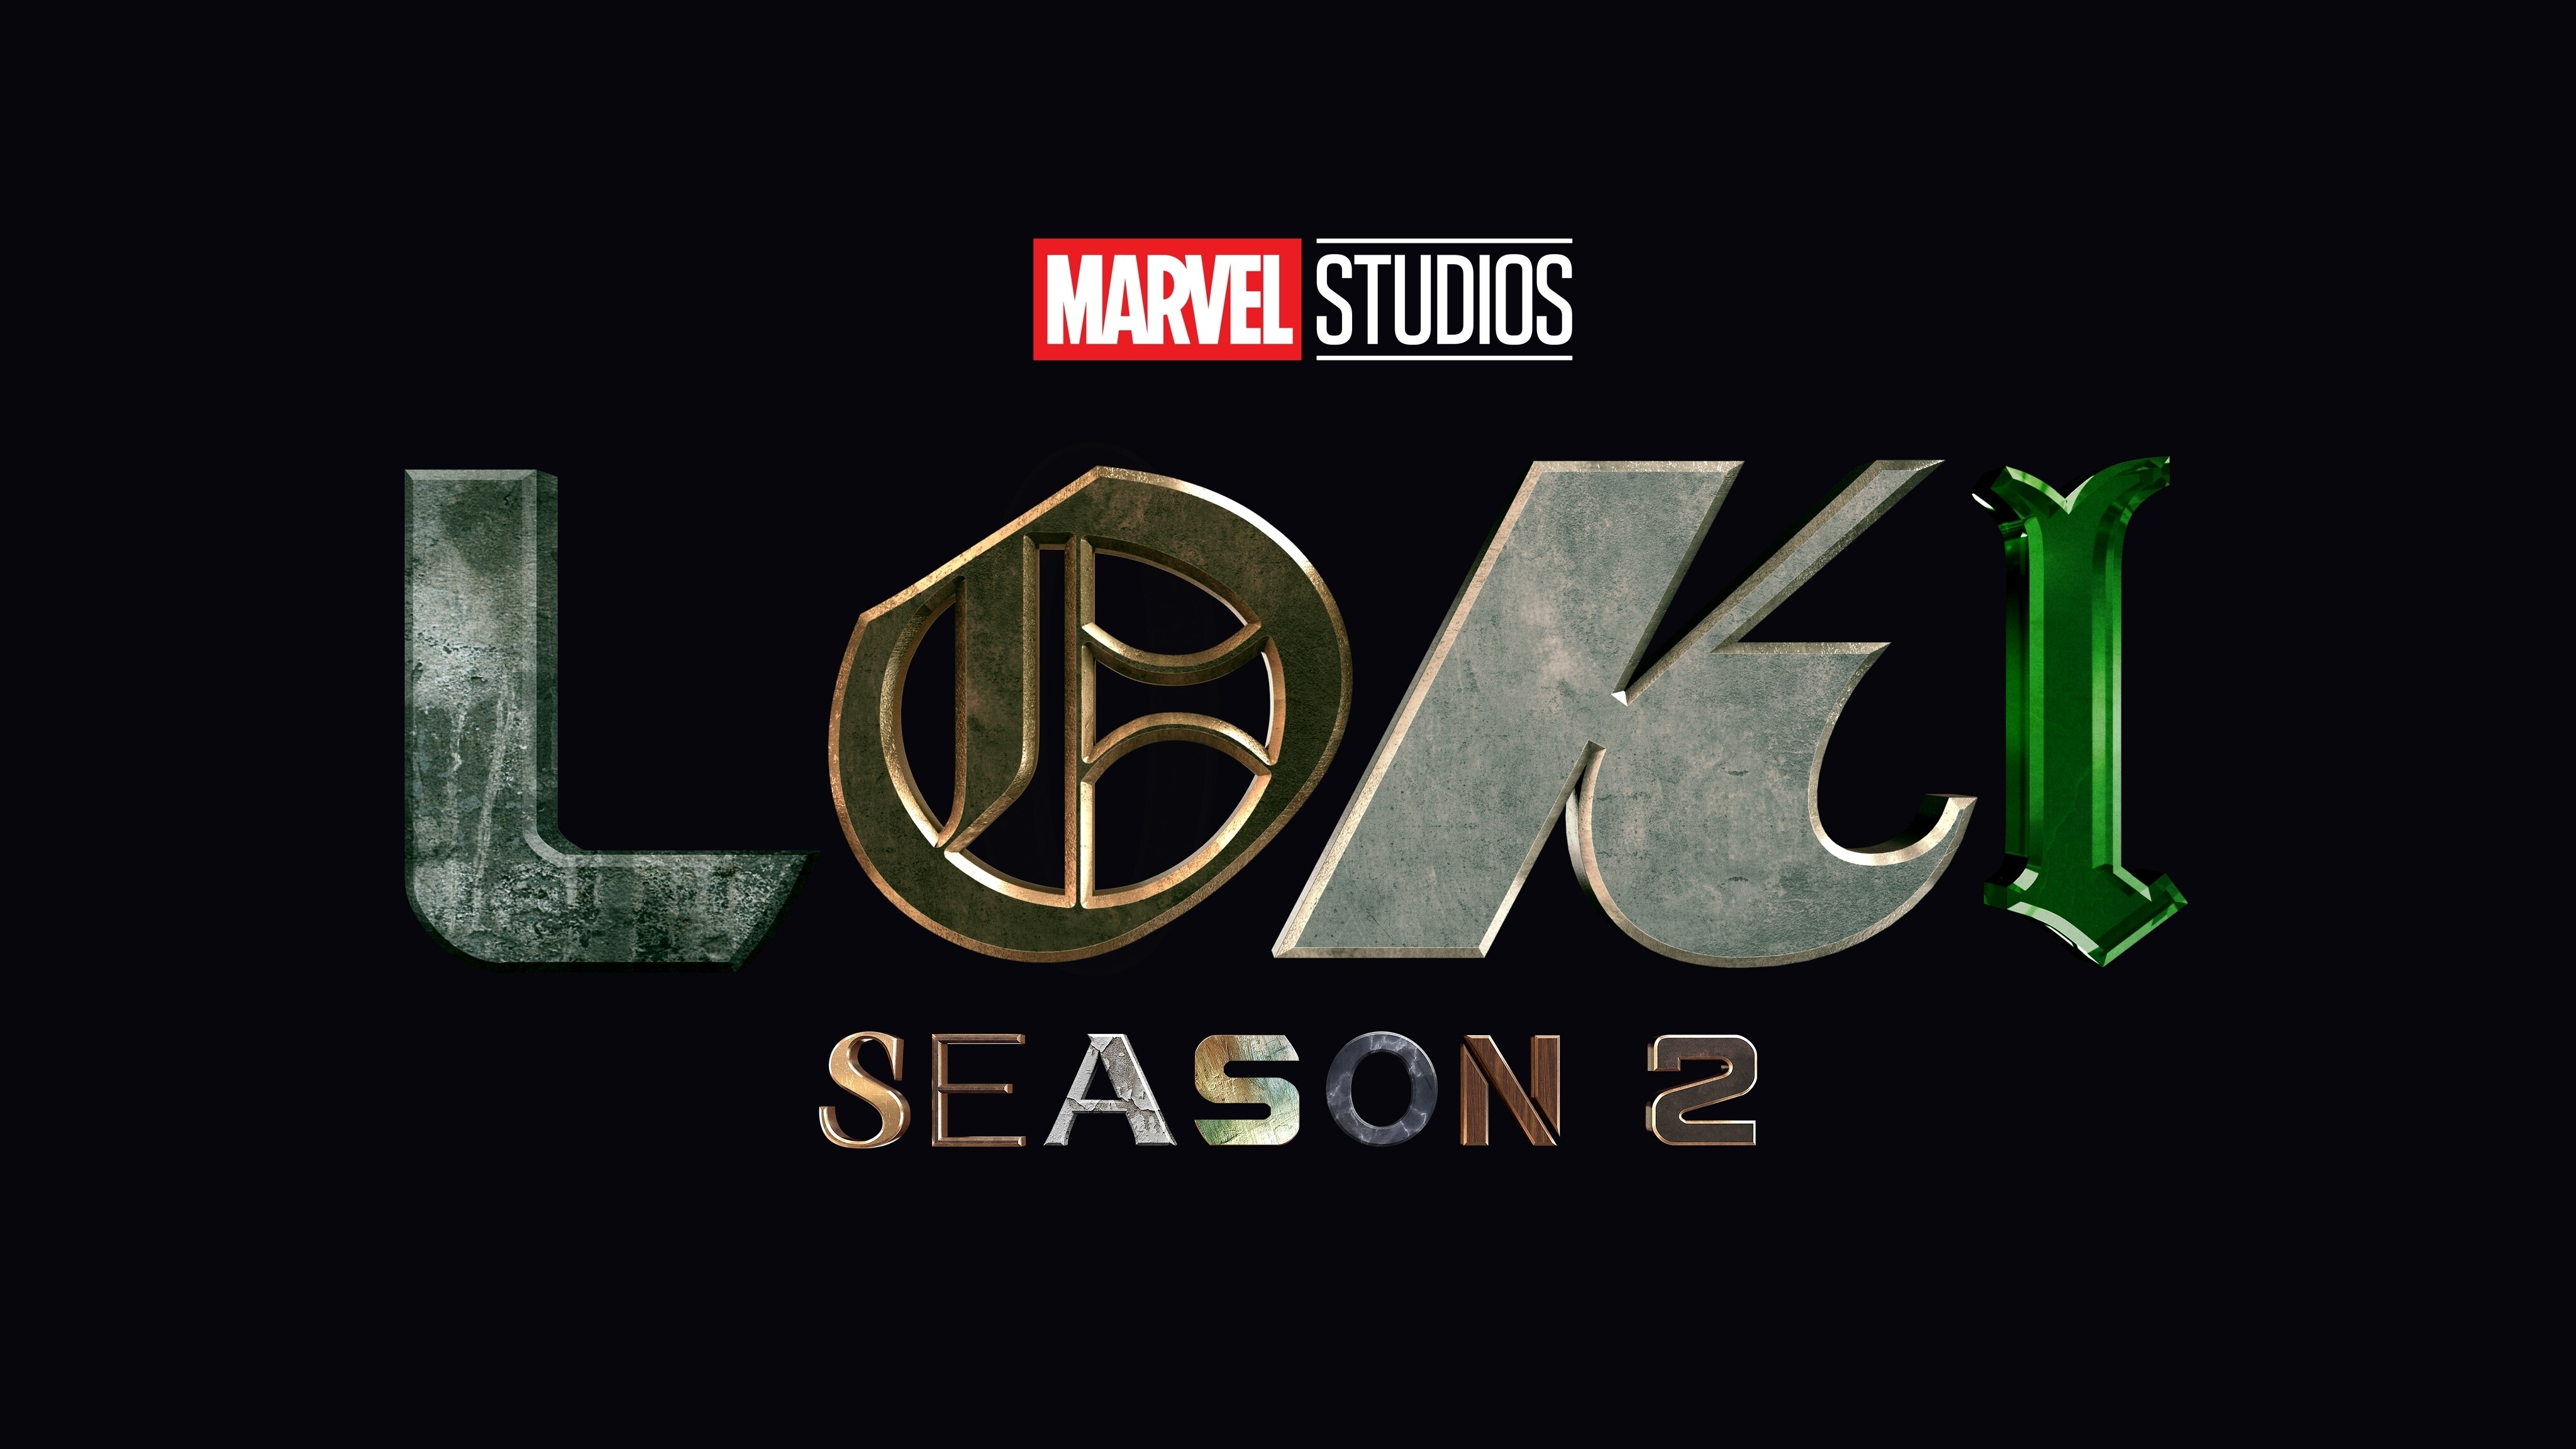 “Loki” Season 2 Is The Second Most Viewed Season Premiere On Disney+ This Year With 10.9 Million Views After Three Days